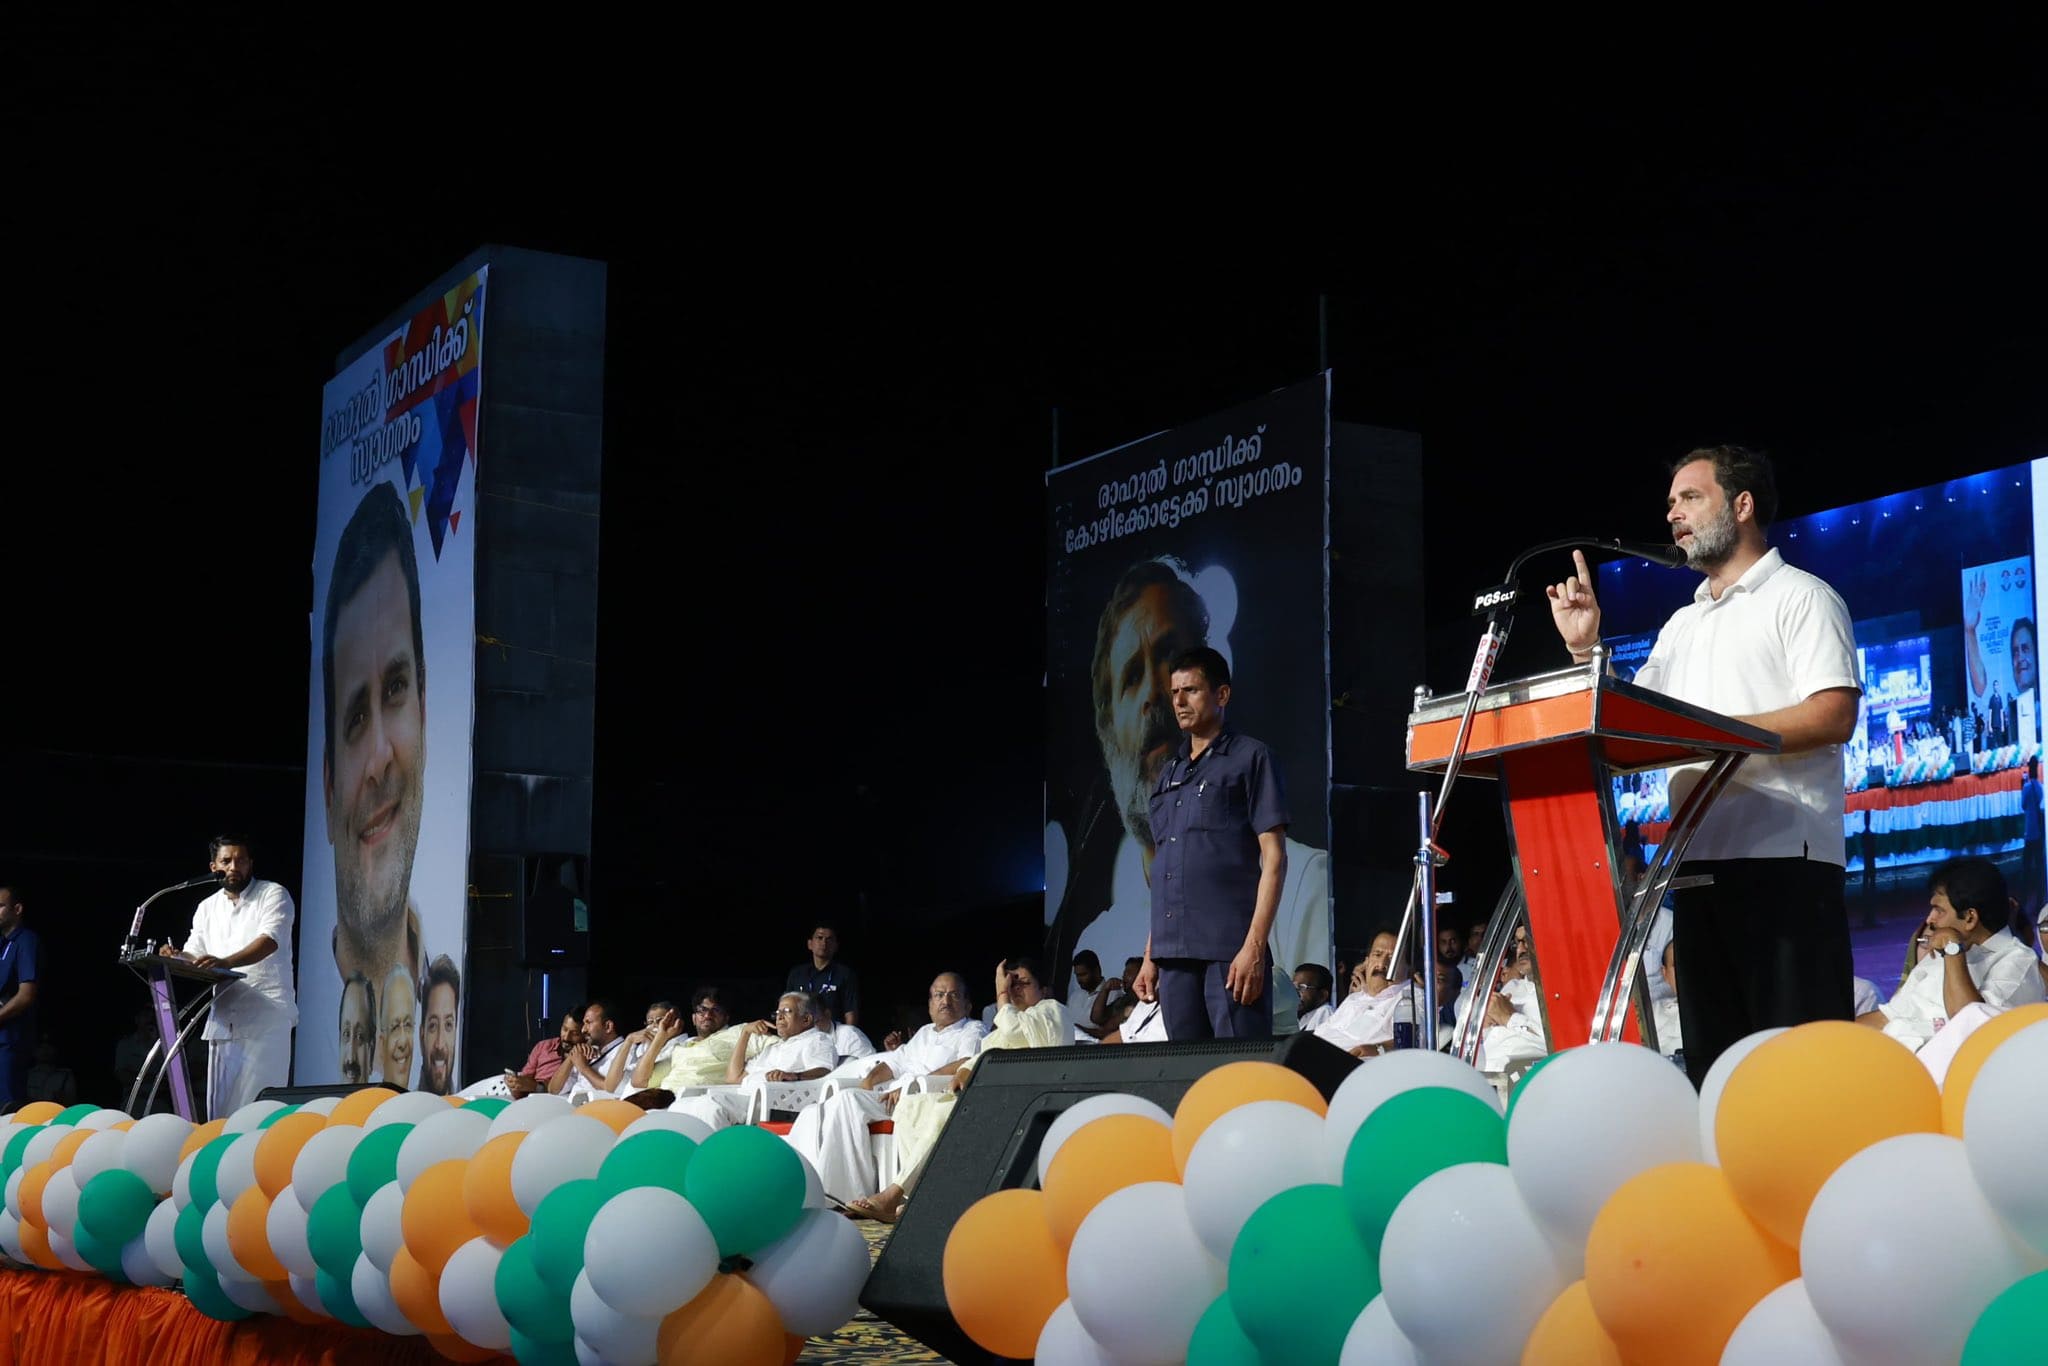 Rahul Gandhi addressing an election campaign rally in Kozhikode on Monday, 15 April. (X)